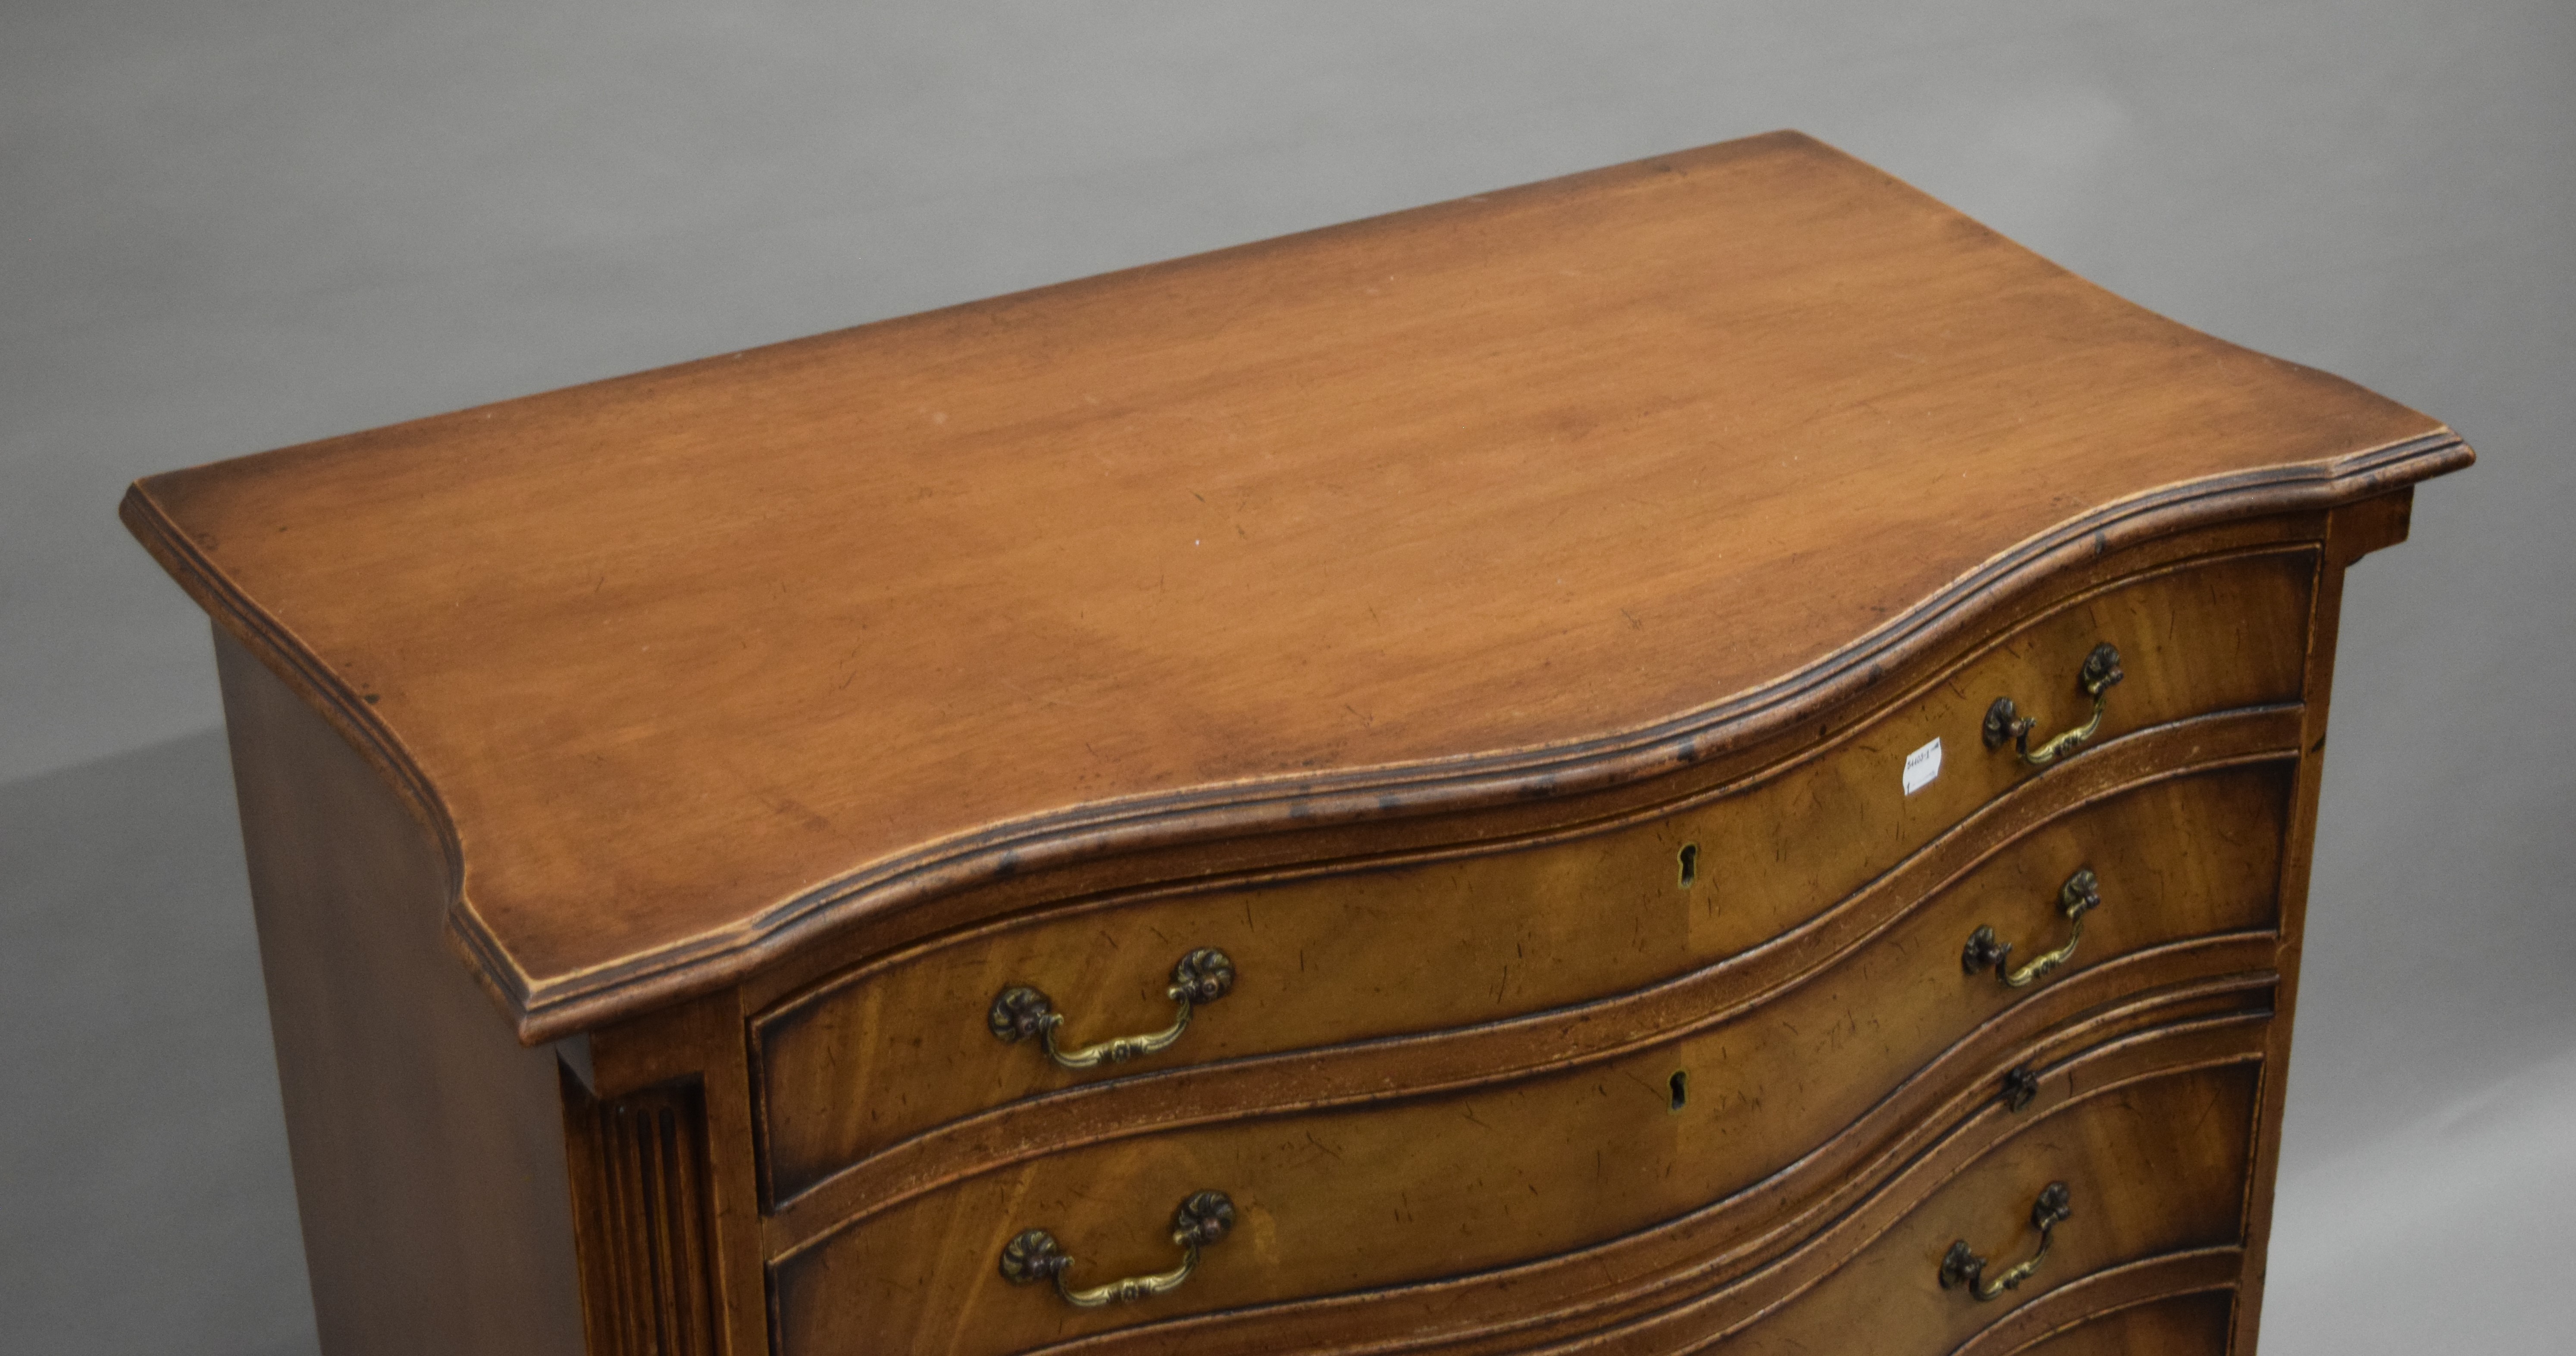 A George III style mahogany Serpentine chest of drawers. 83.5 cm wide, 100 cm high, 49 cm deep. - Image 3 of 6